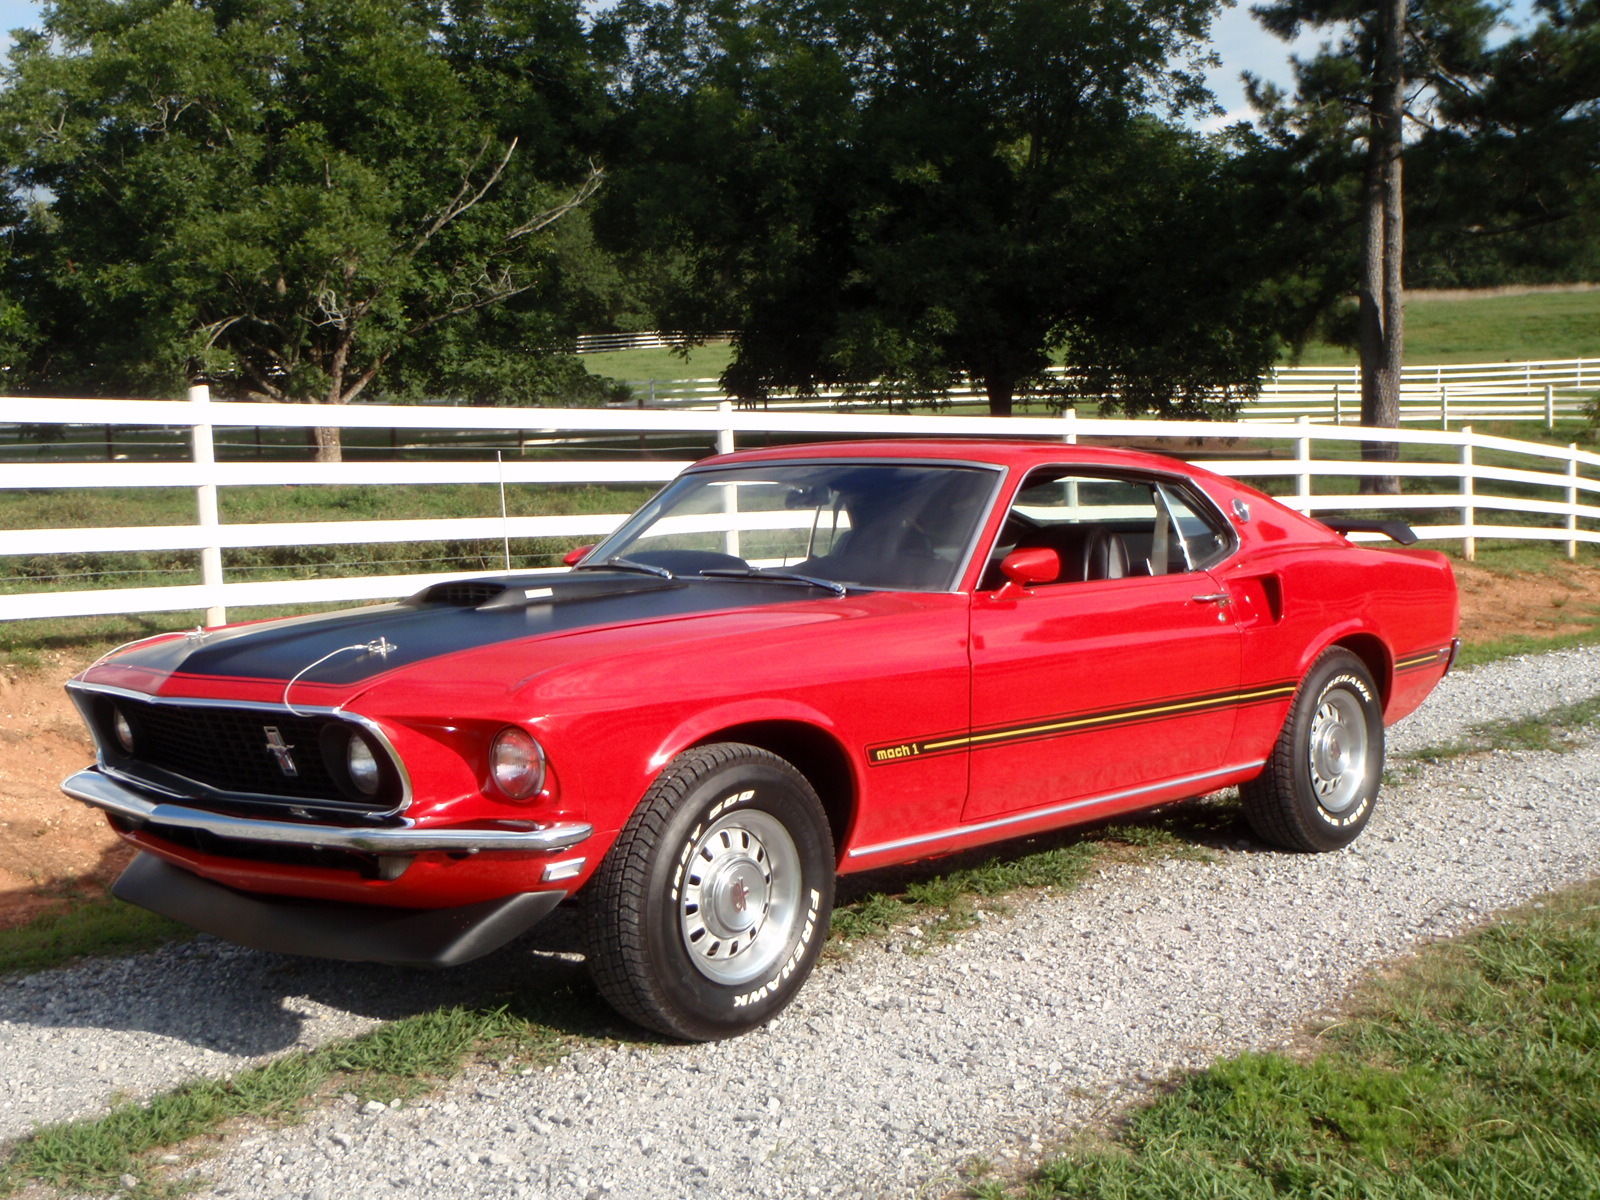 1969 Ford Mustang Mach 1 SportsRoof Pictures Gallery ~ Hot Rod Cars